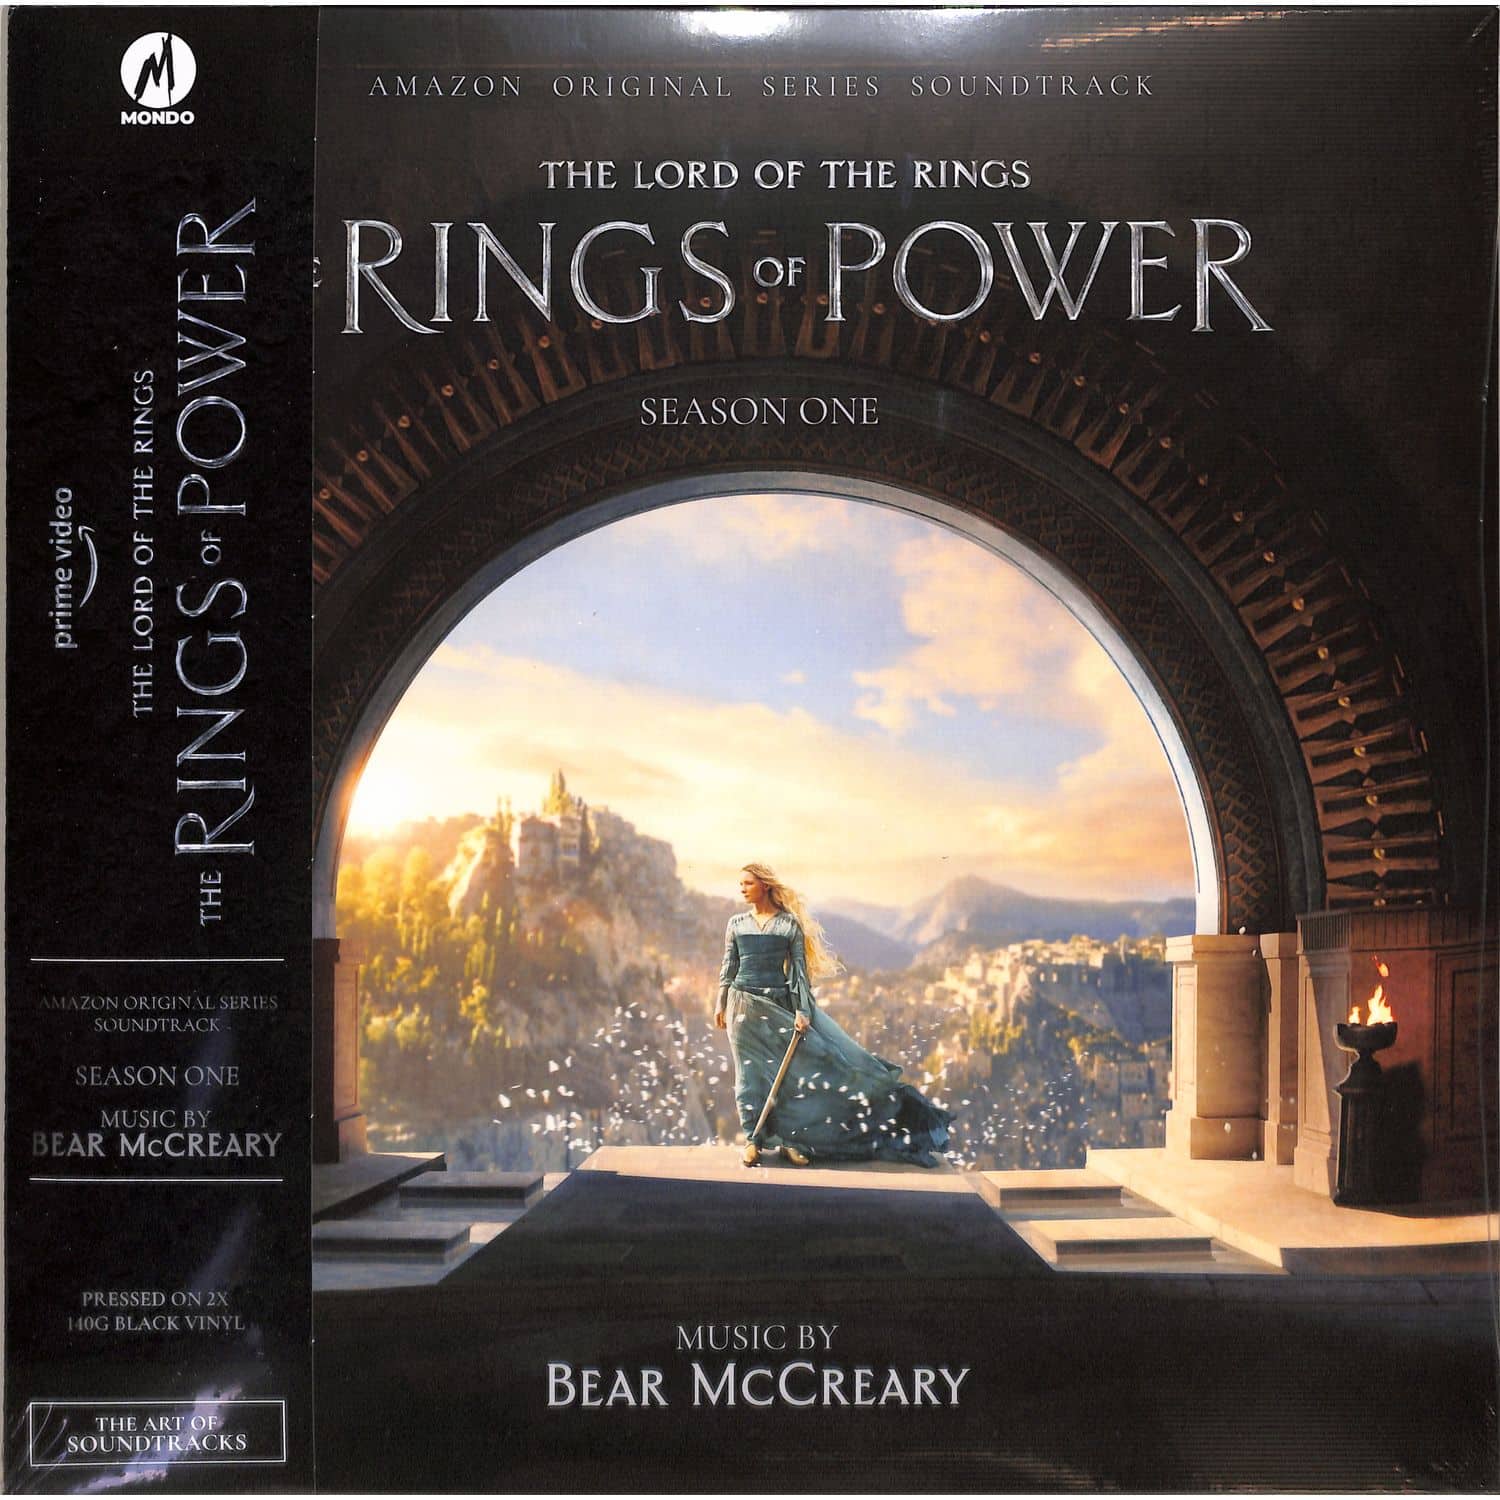 OST / Bear McCreary / Howard Shore - THE LORD OF THE RINGS: THE RINGS OF POWER SEASON 1 